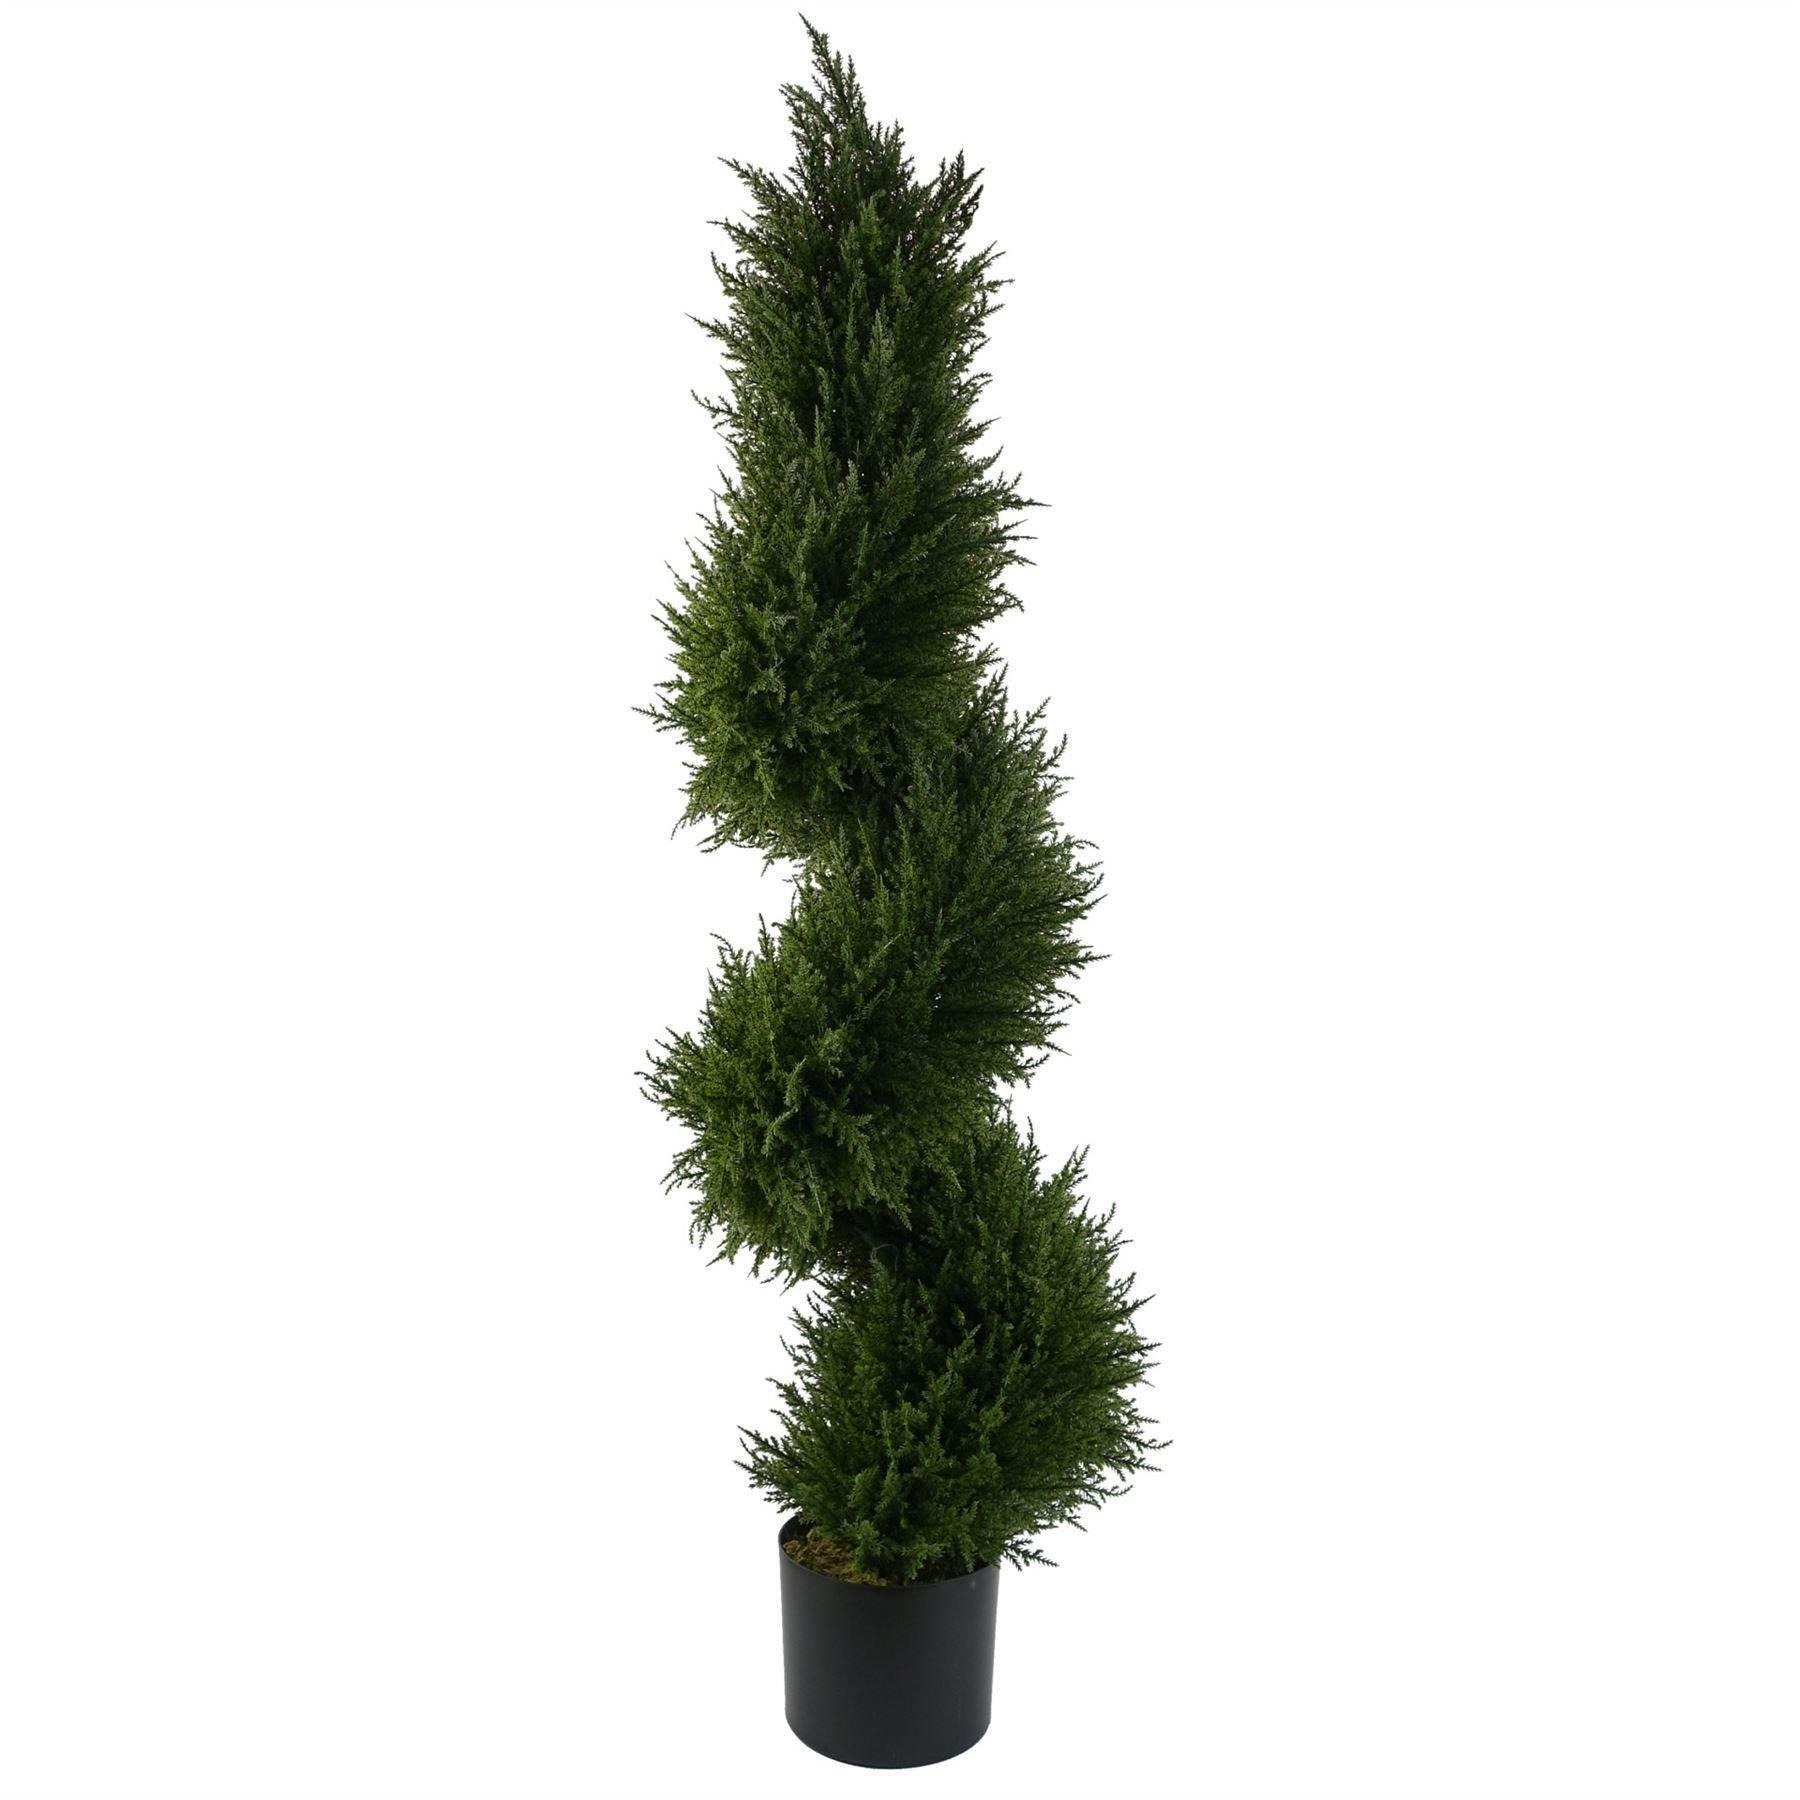 120cm Sprial Cypress Tree Artificial Topiary - image 1